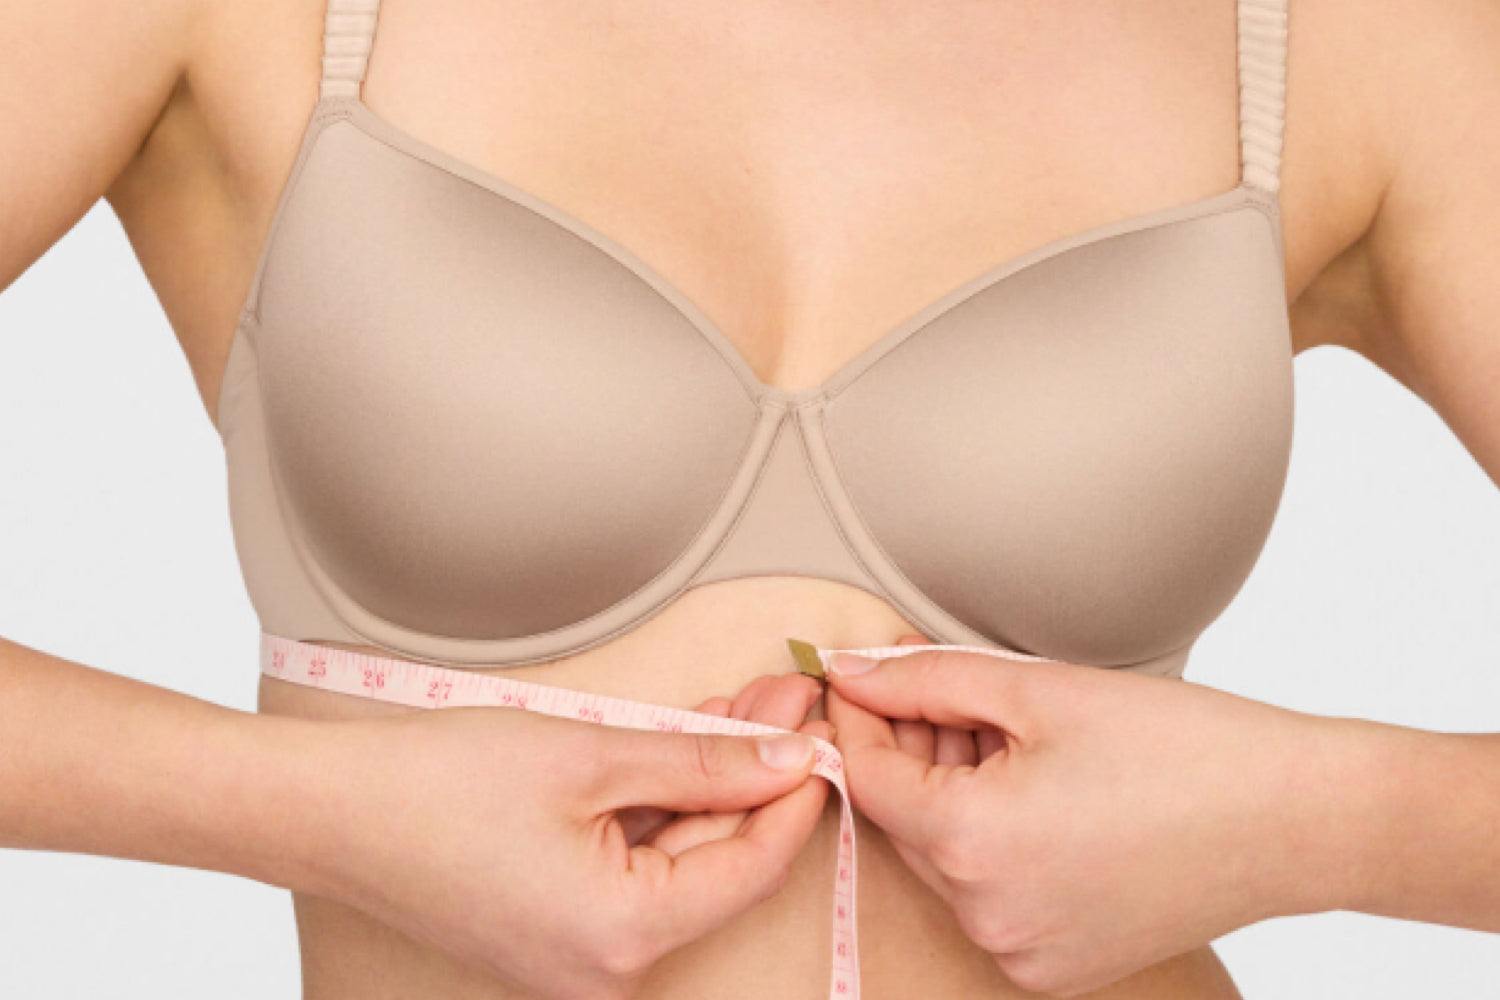 What size bra should I try if the 32B band is too big but the cups